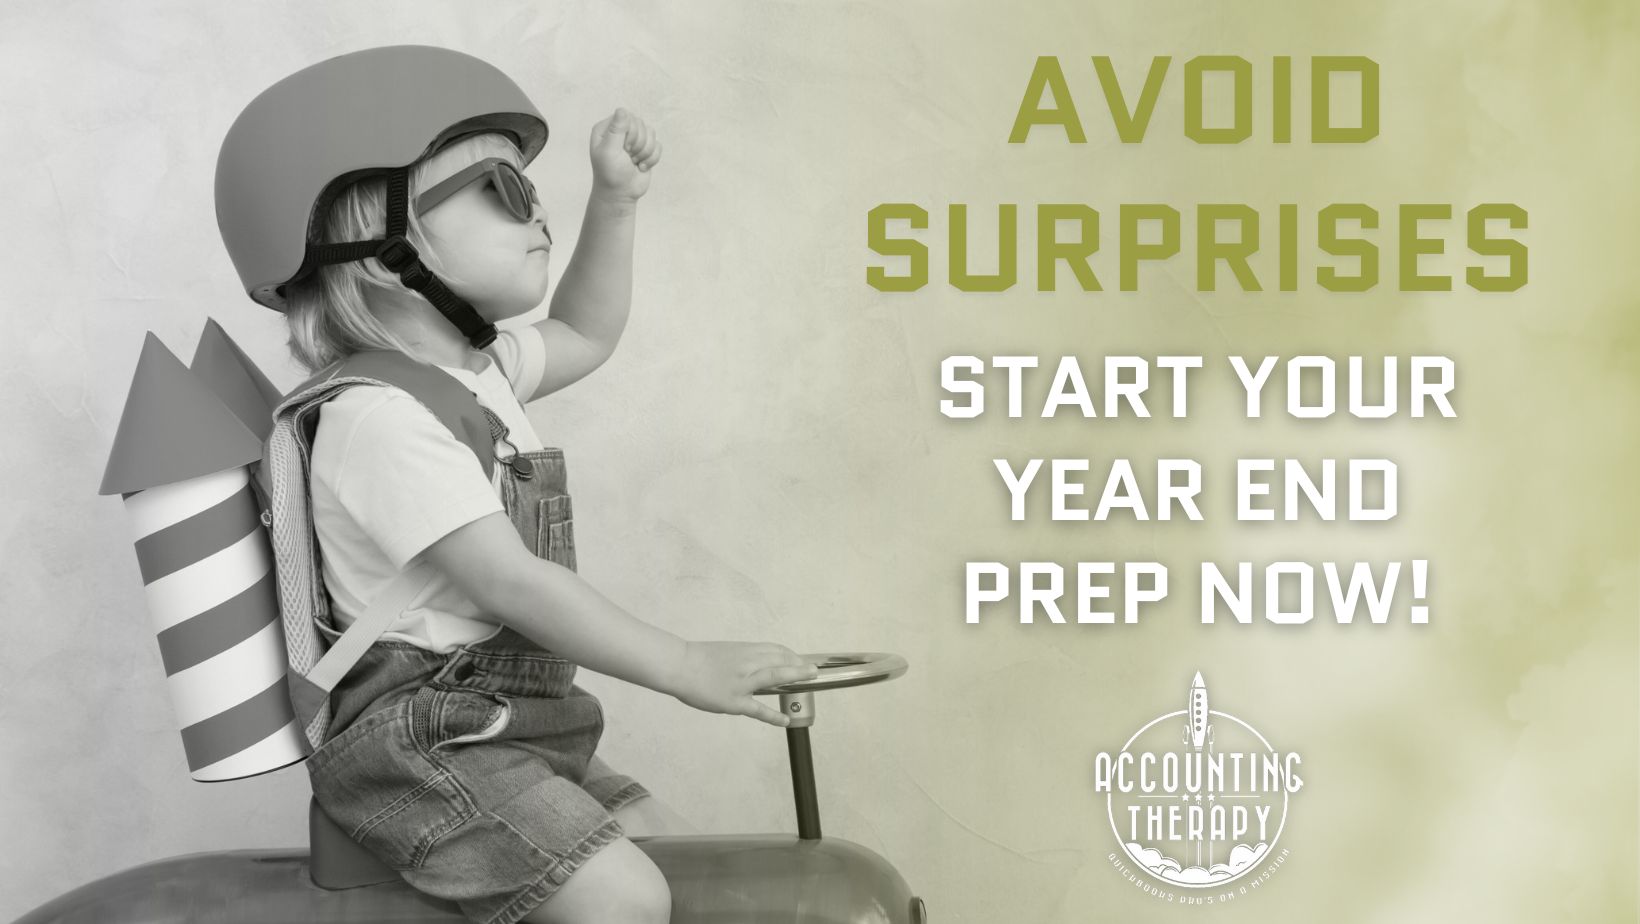 ARE YOU PREPARED FOR YEAR END?